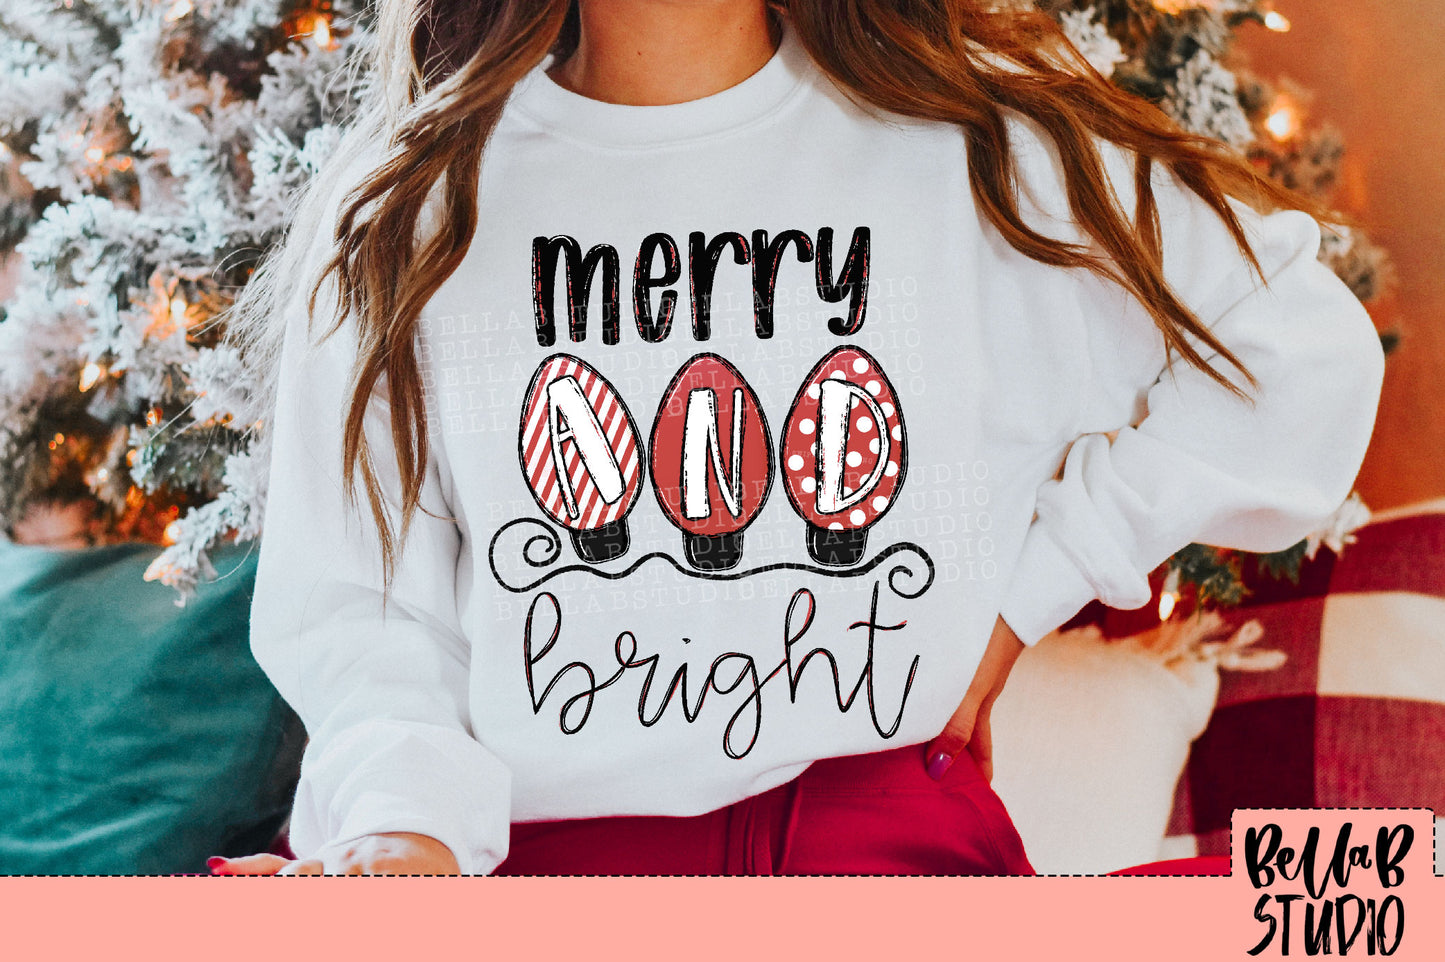 Merry and Bright Christmas Bulbs PNG Design